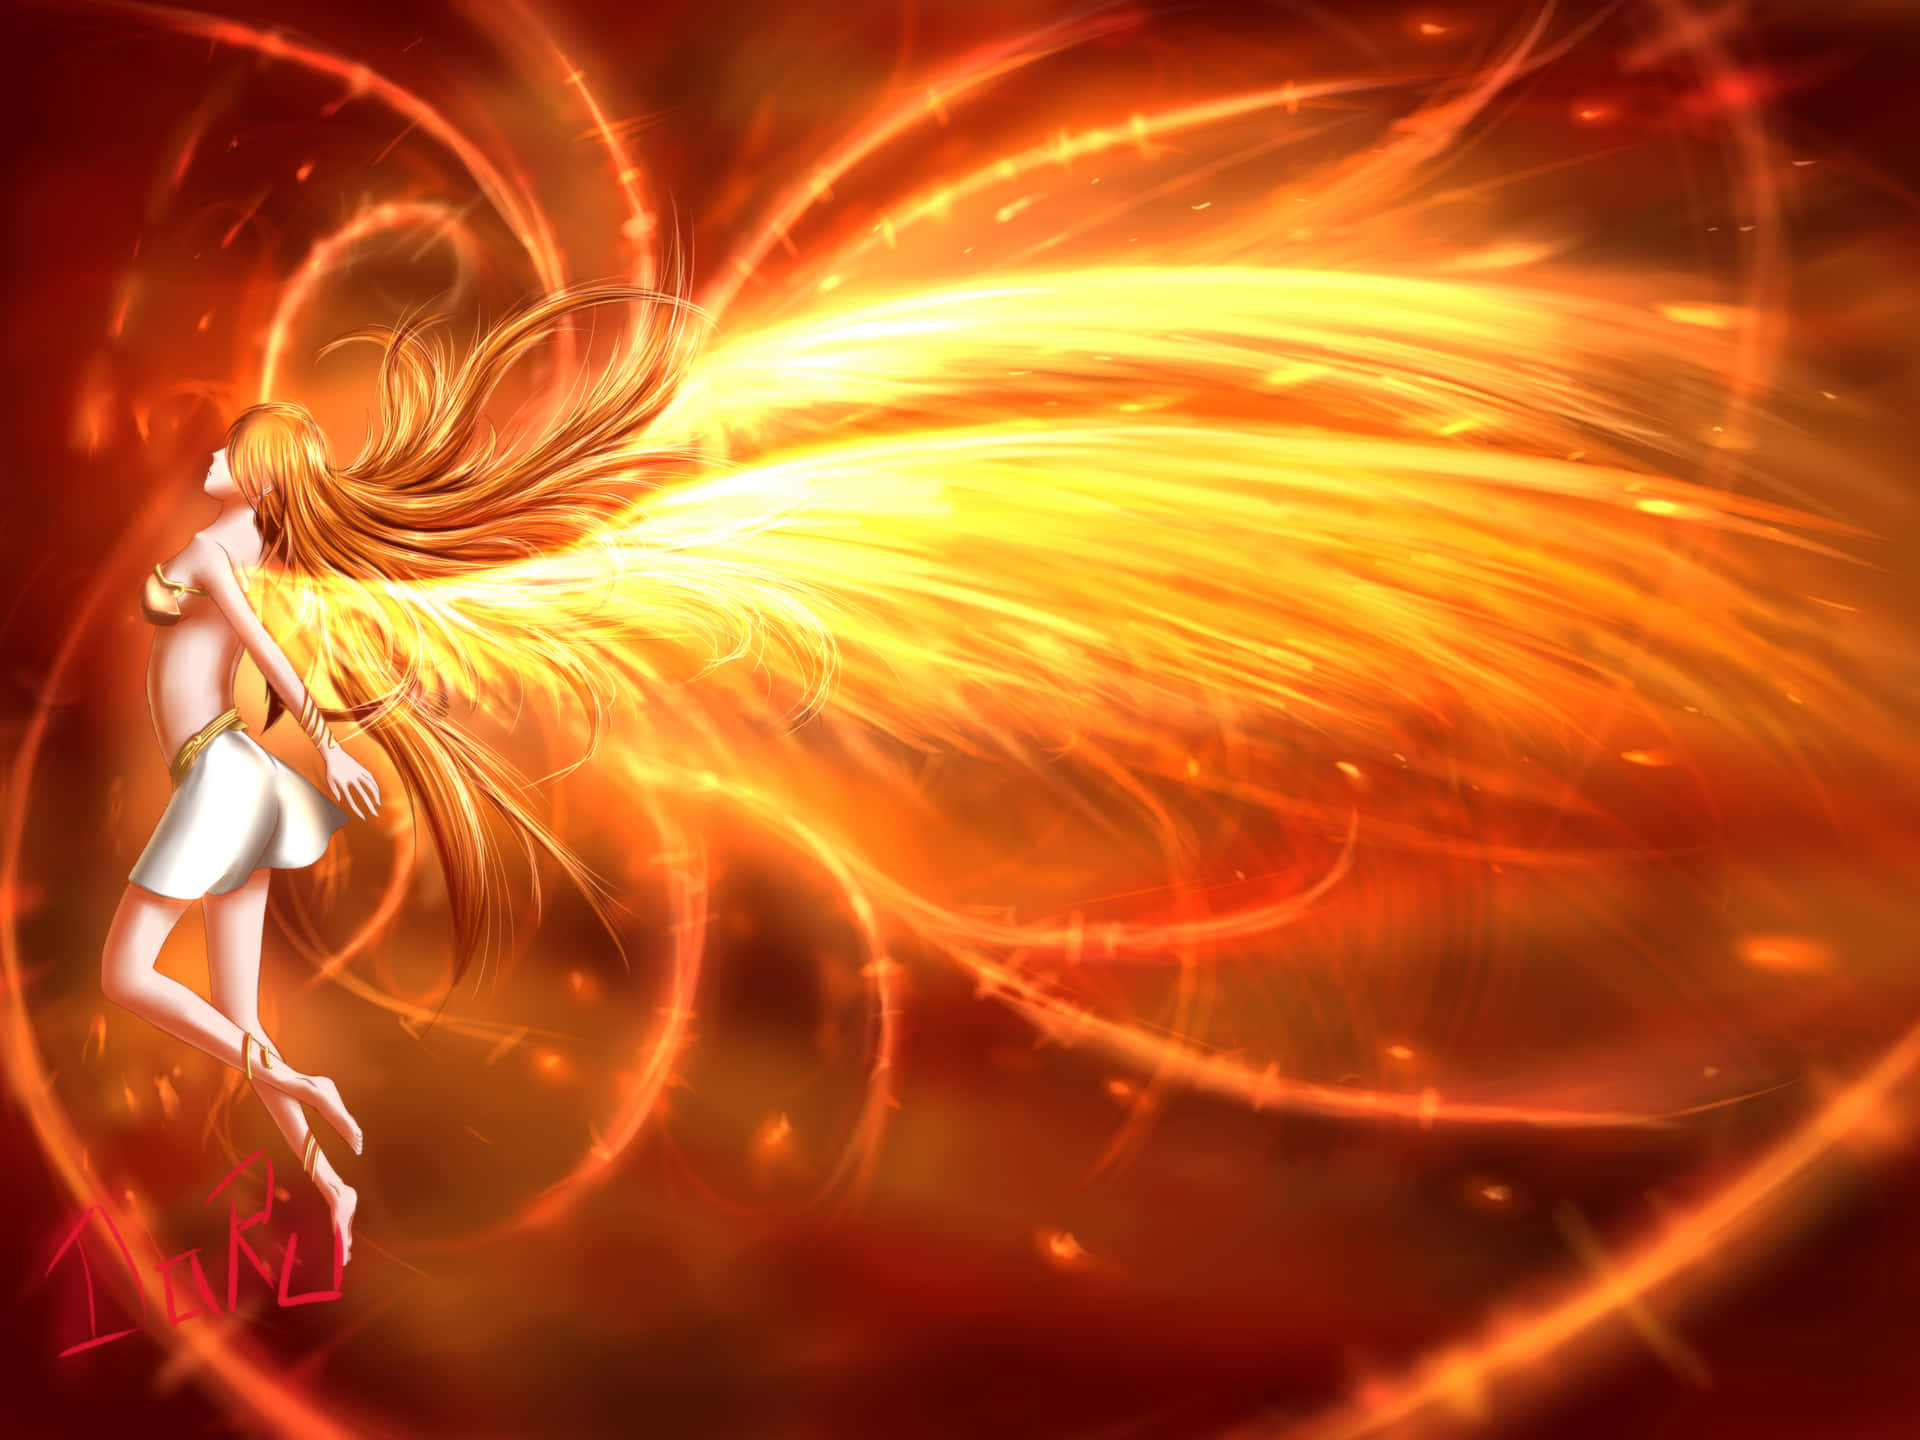 Download “The Beauty and Passion of Anime Fire” Wallpaper